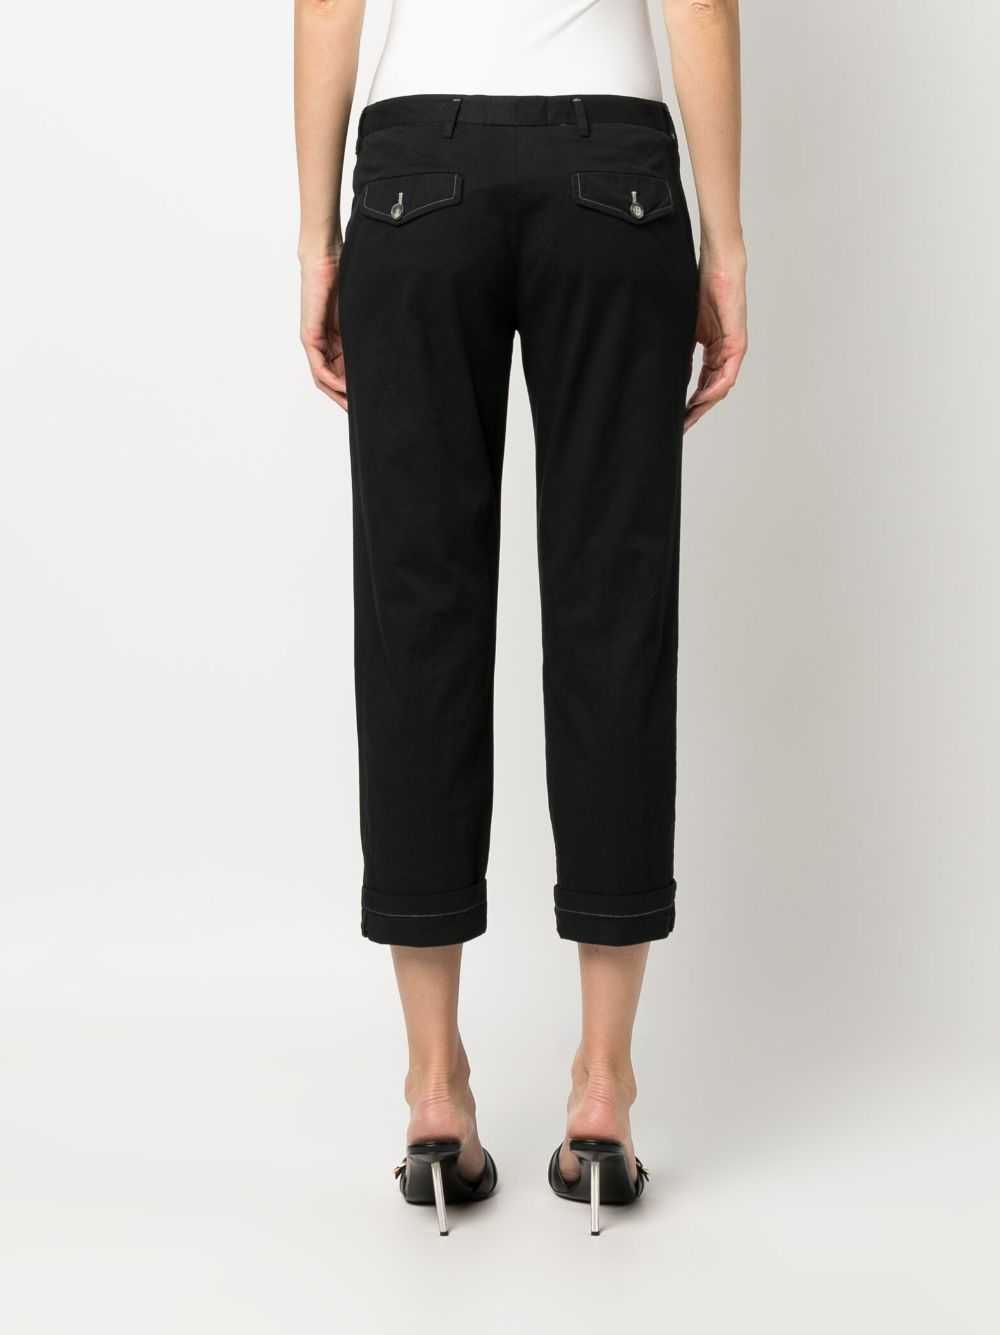 Prada Pre-Owned 2000s low-rise cropped trousers -… - image 4